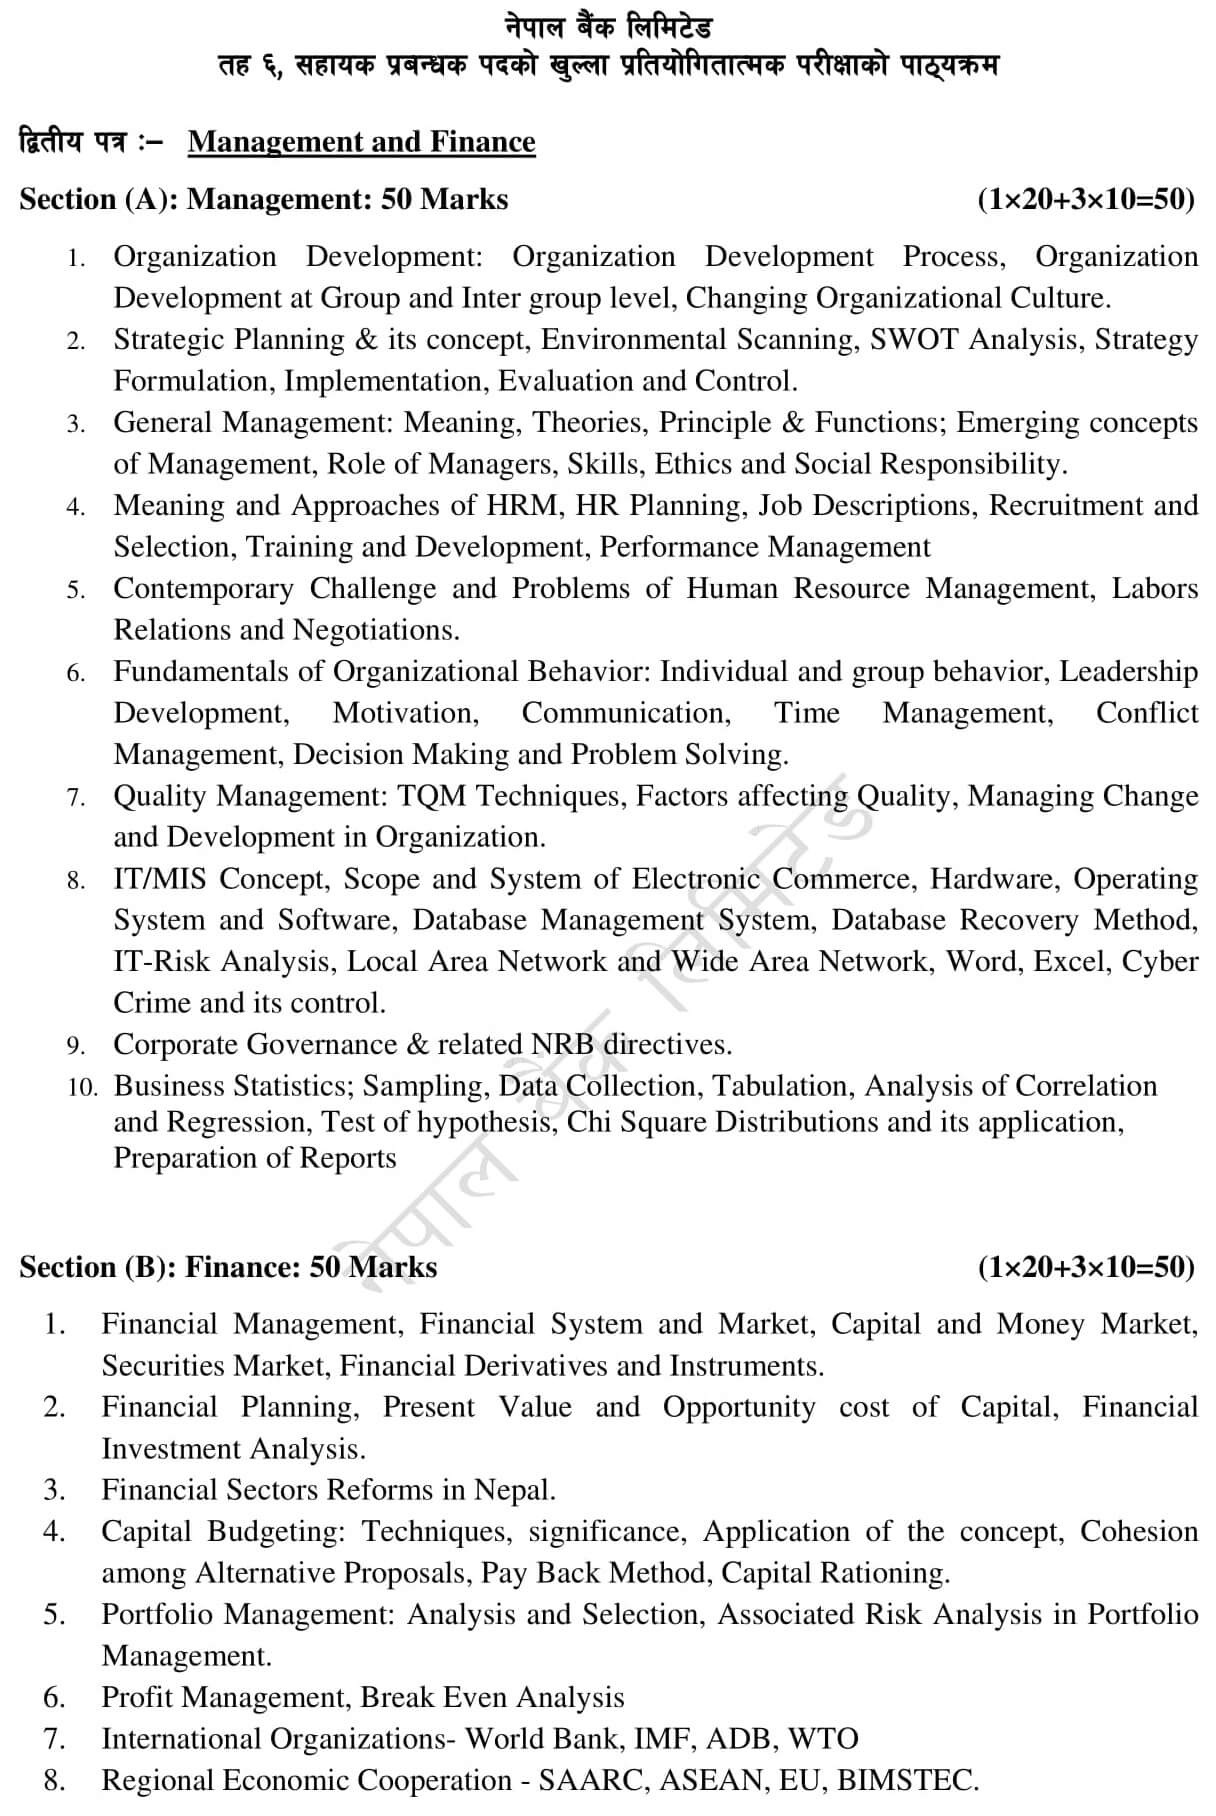 Syllabus of Nepal Bank Limited Level 6 Assistant Manager